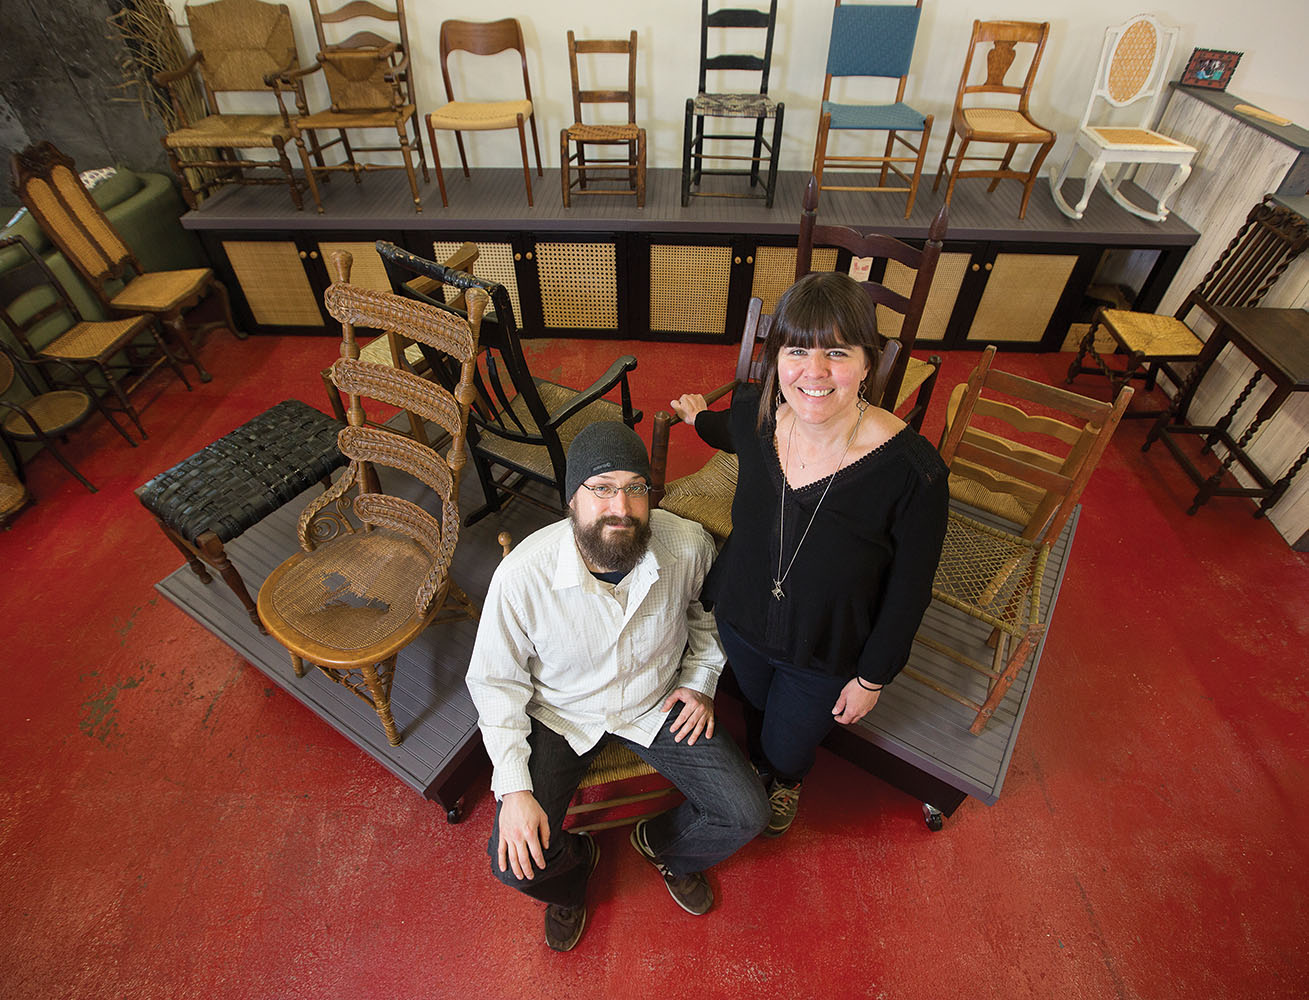 Brandy Clements and Dave Klingler confidently call themselves “chair nerds.” Their Silver River Center for Chair Caning is the only facility of its kind in North America.. Photo by Matt Rose